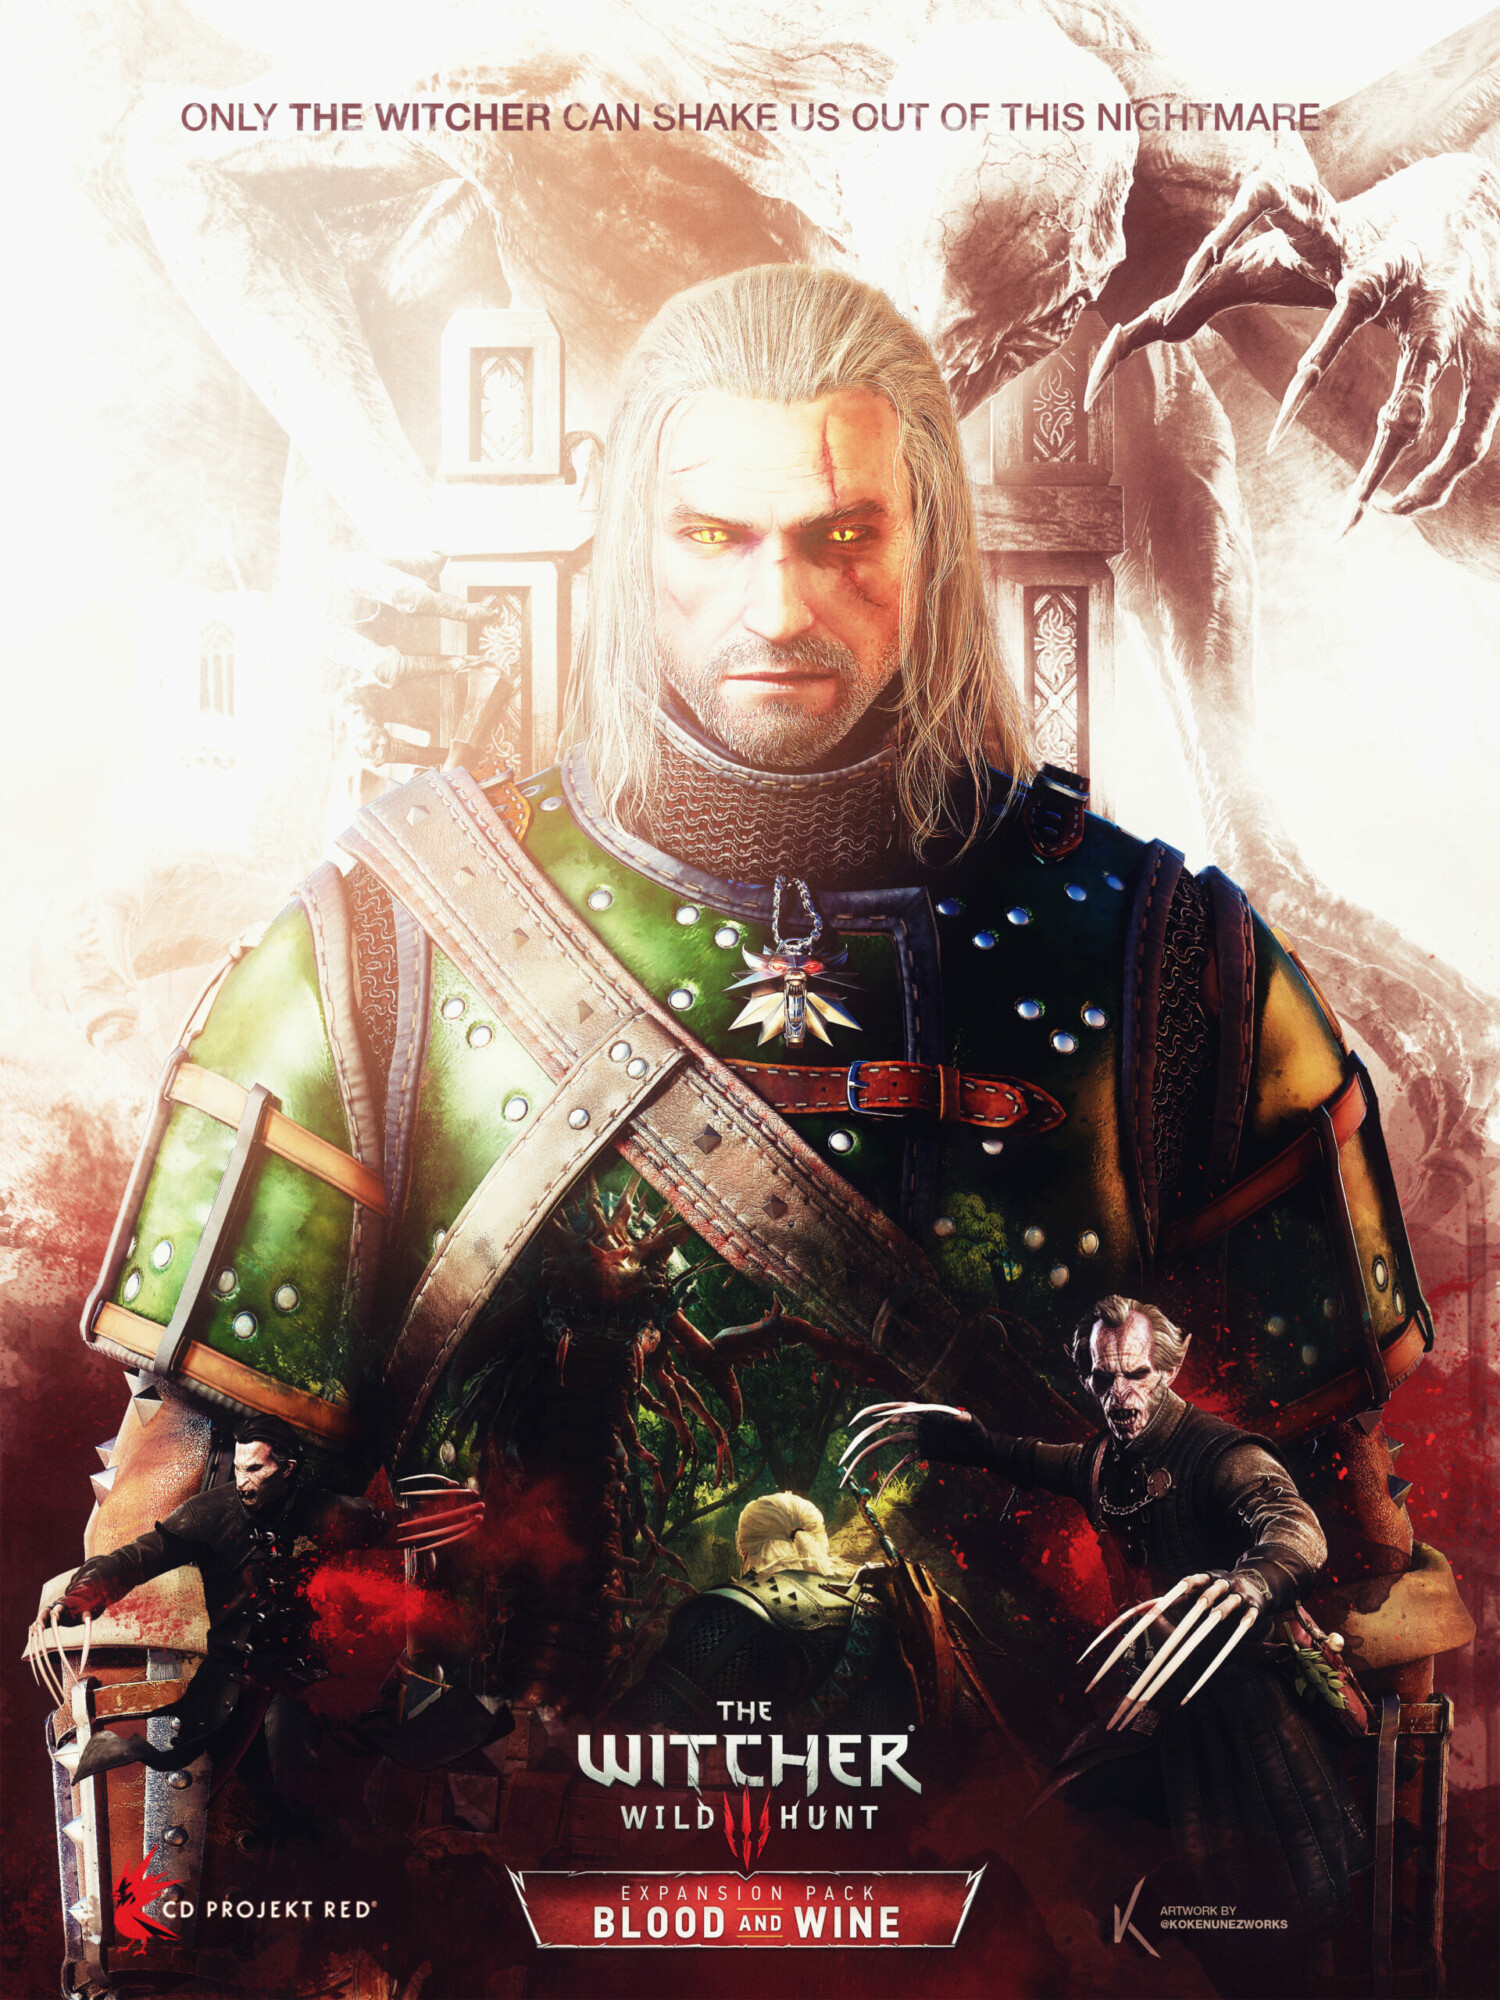 witcher 3 blood and wine